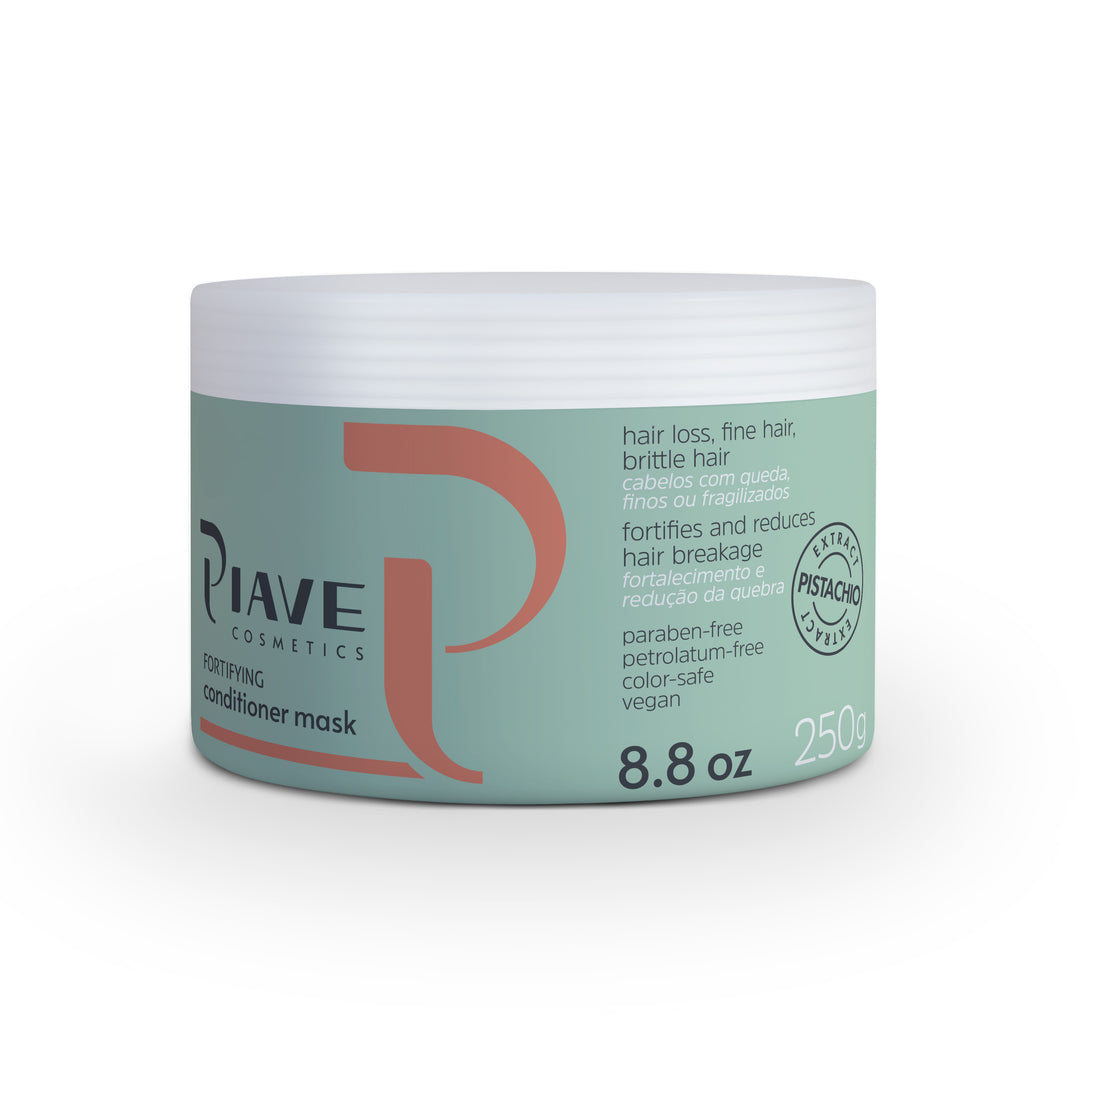 Fortifying Conditioner Mask 250g